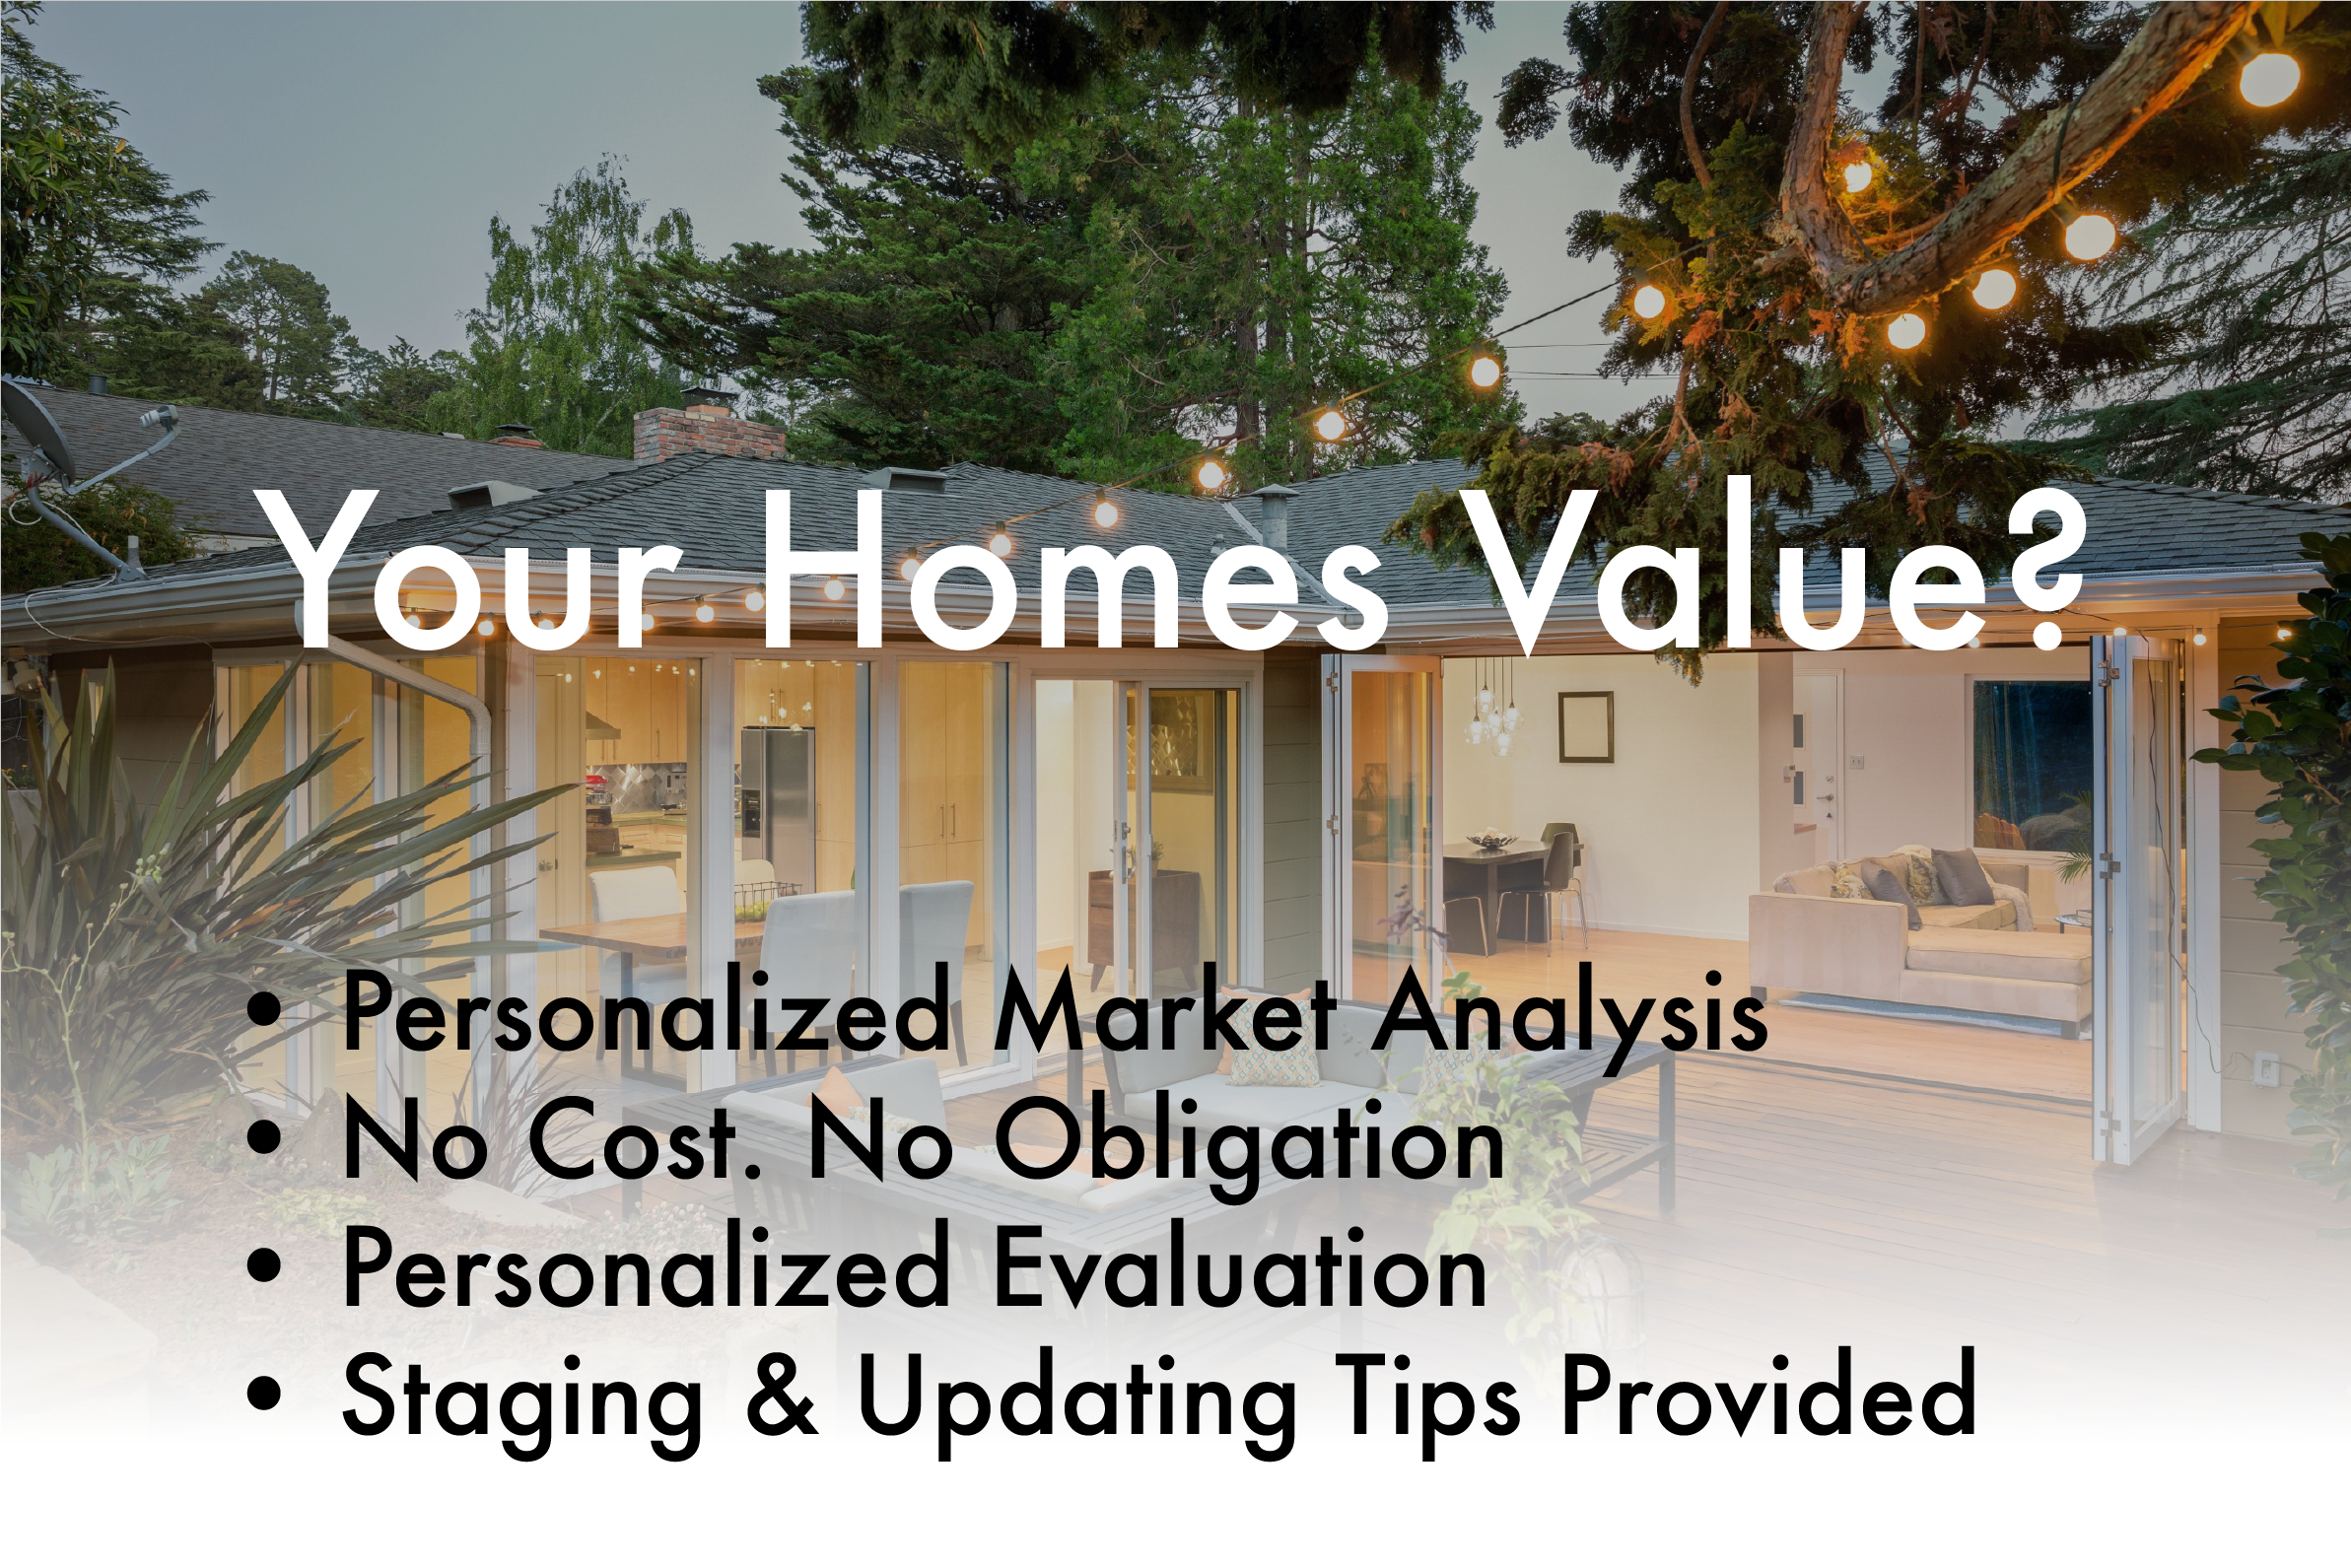 Your Homes Value?